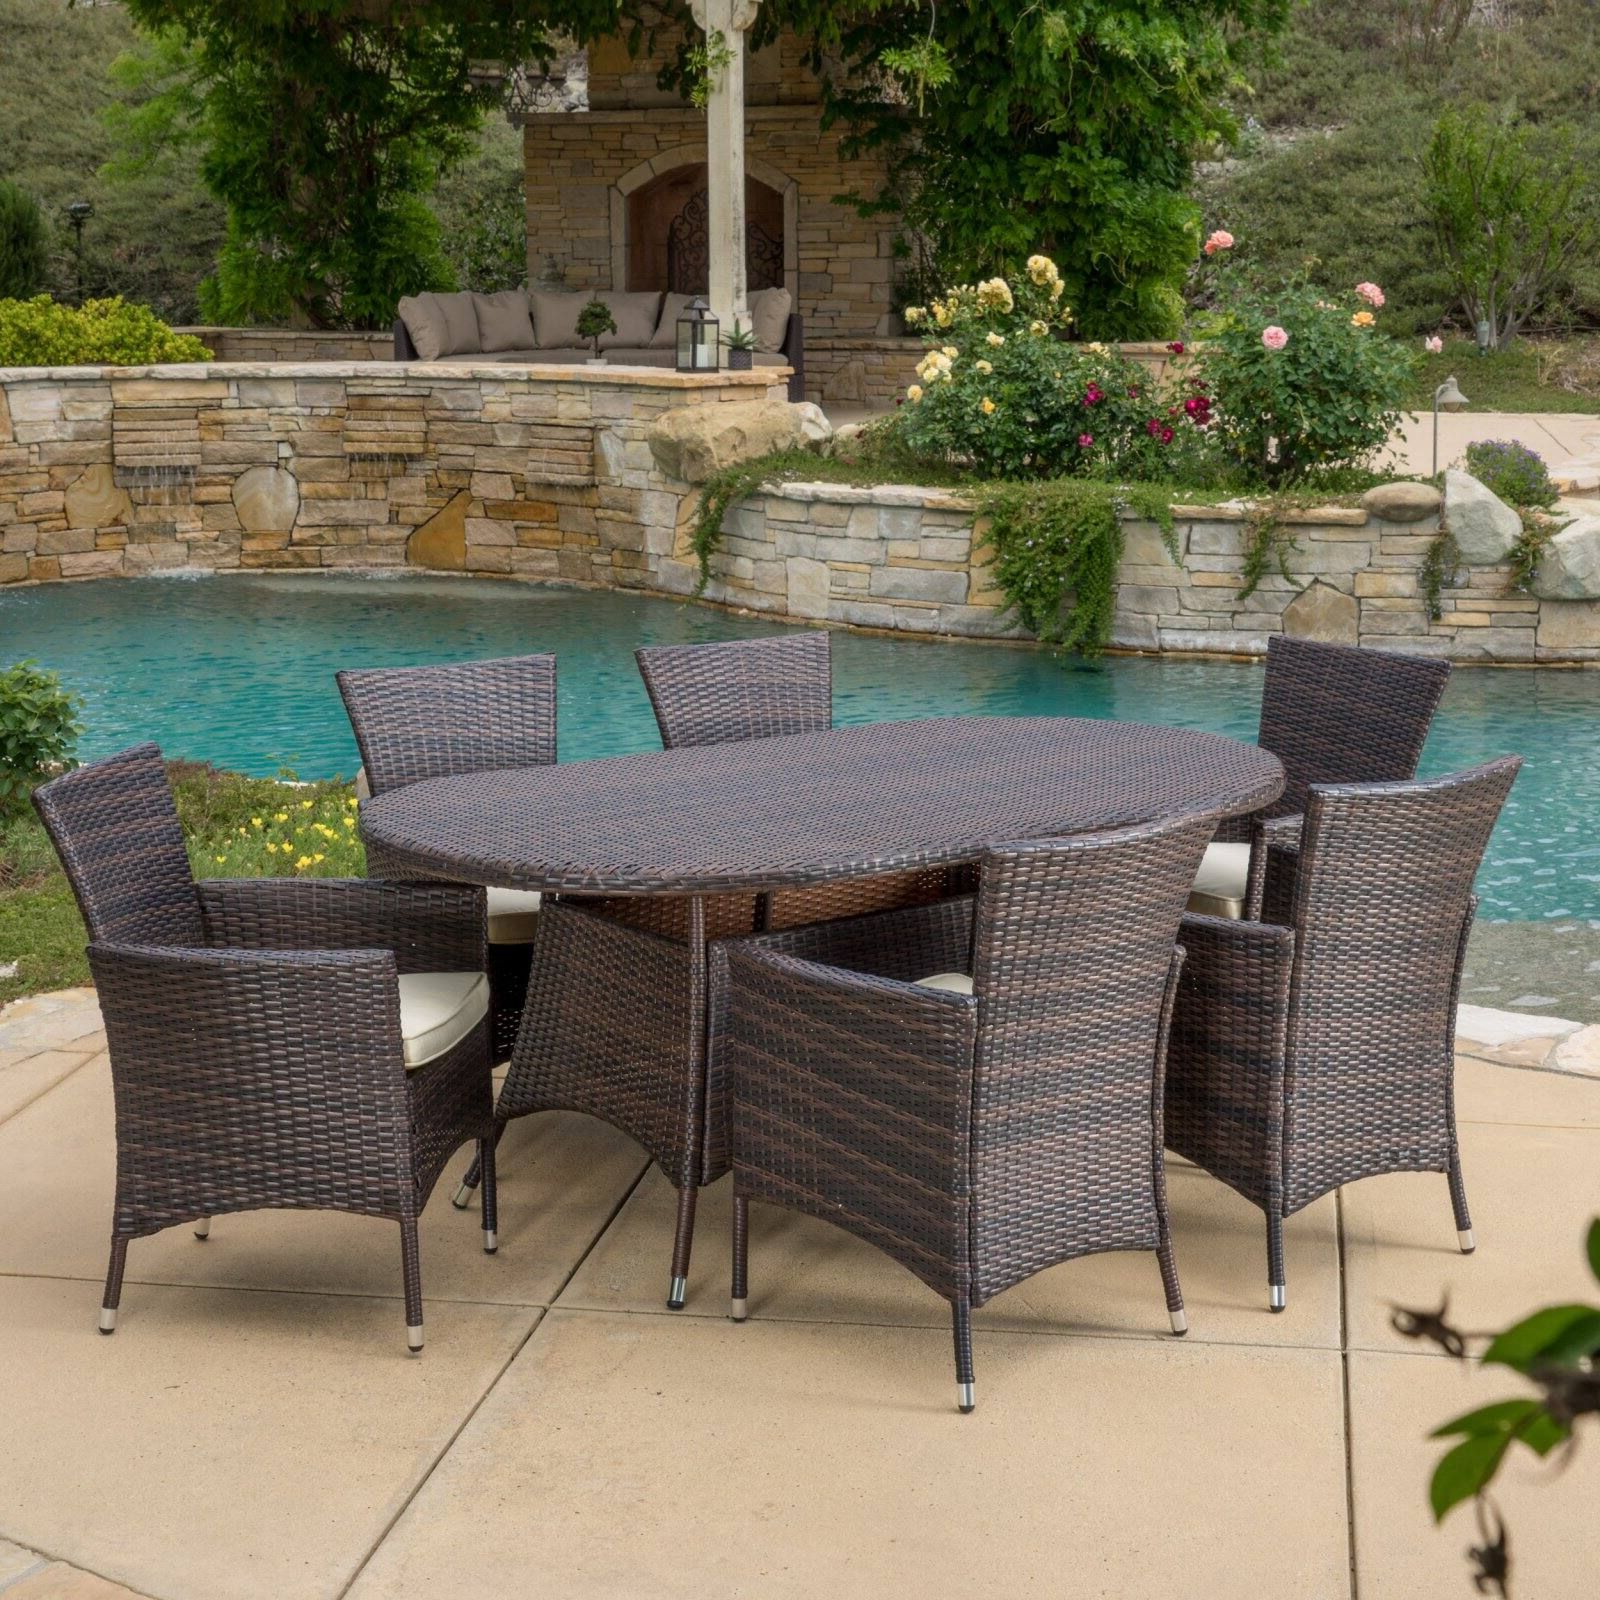 Newest Hannah Wicker 7 Piece Oval Patio Dining Set – Walmart – Walmart For Oval 7 Piece Outdoor Patio Dining Sets (View 4 of 15)